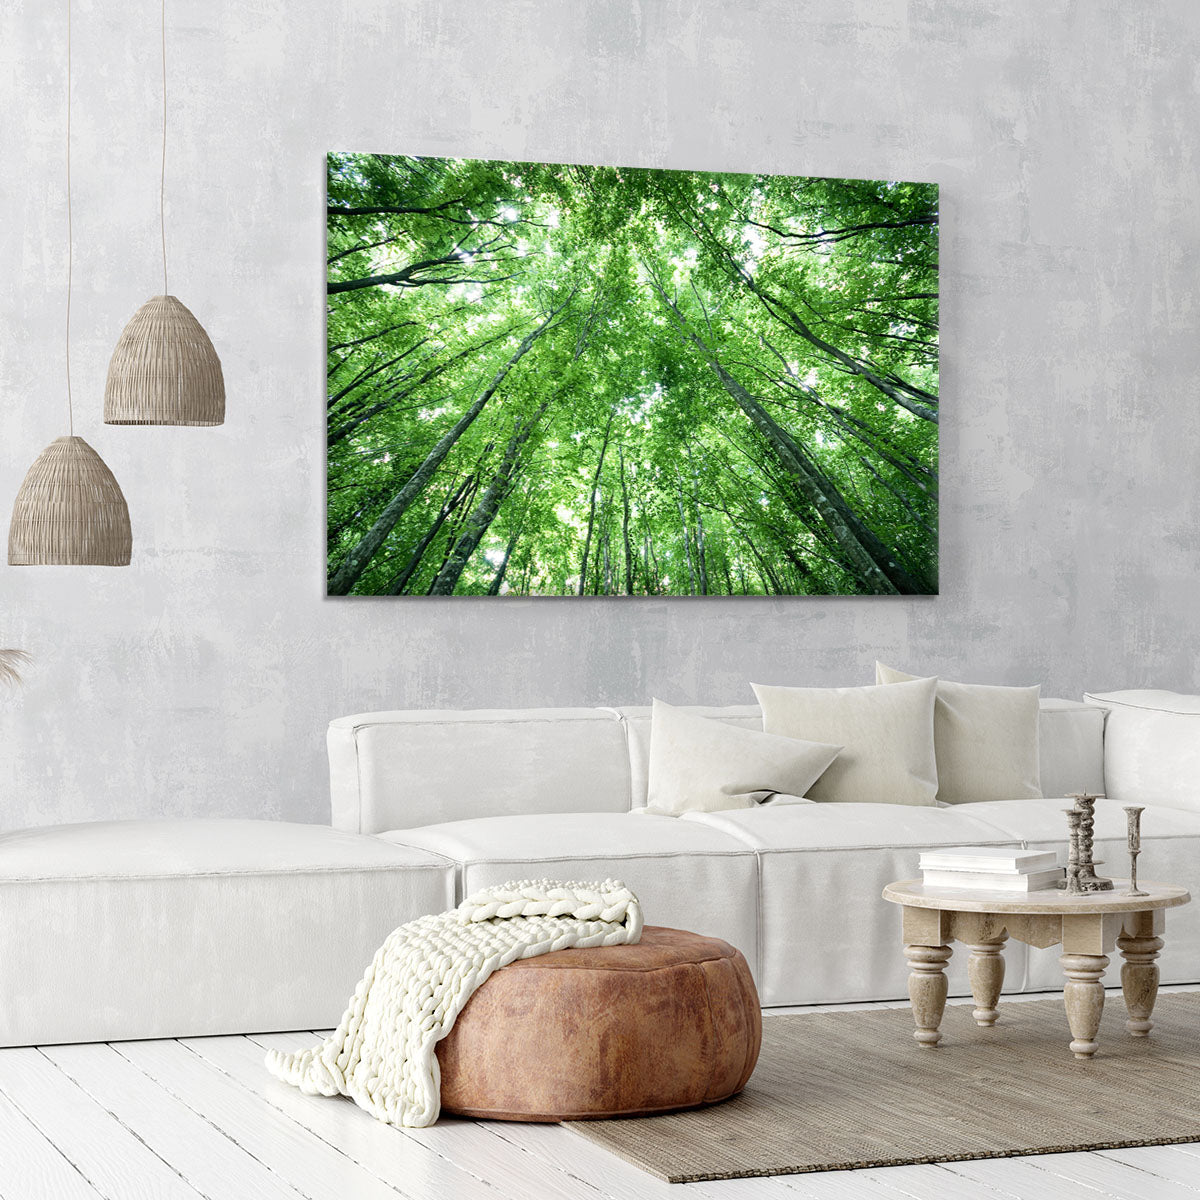 trees meeting eachother at the sky Canvas Print or Poster - Canvas Art Rocks - 6